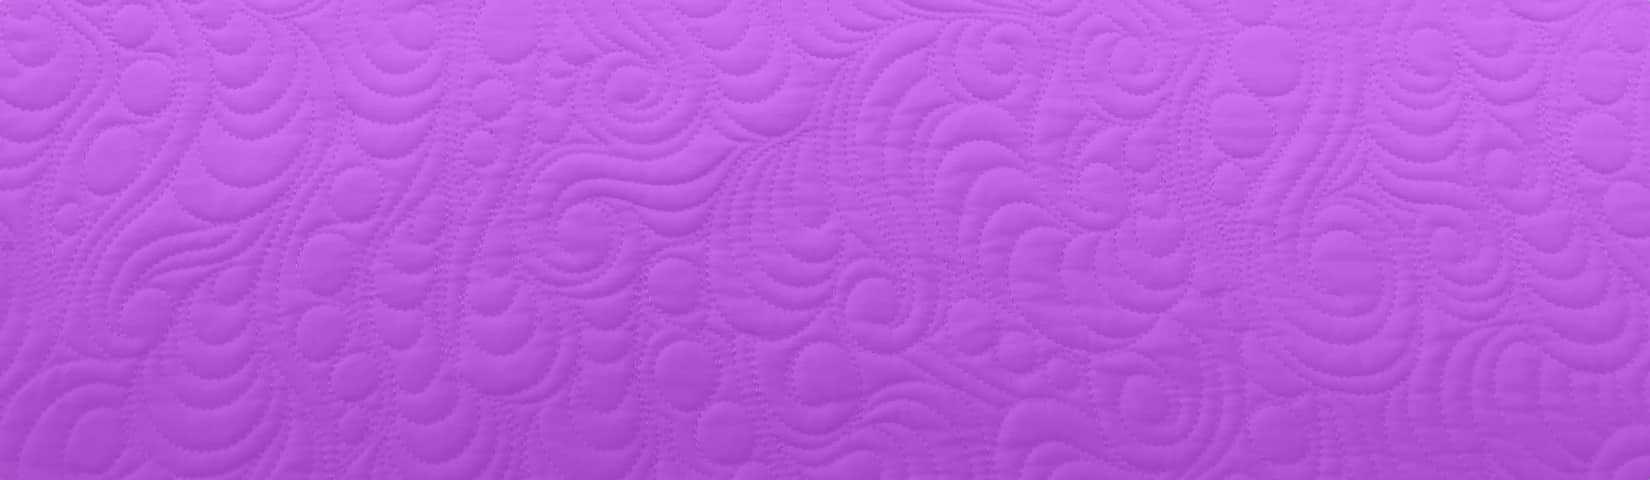 Texture of quilting on an electric purple background